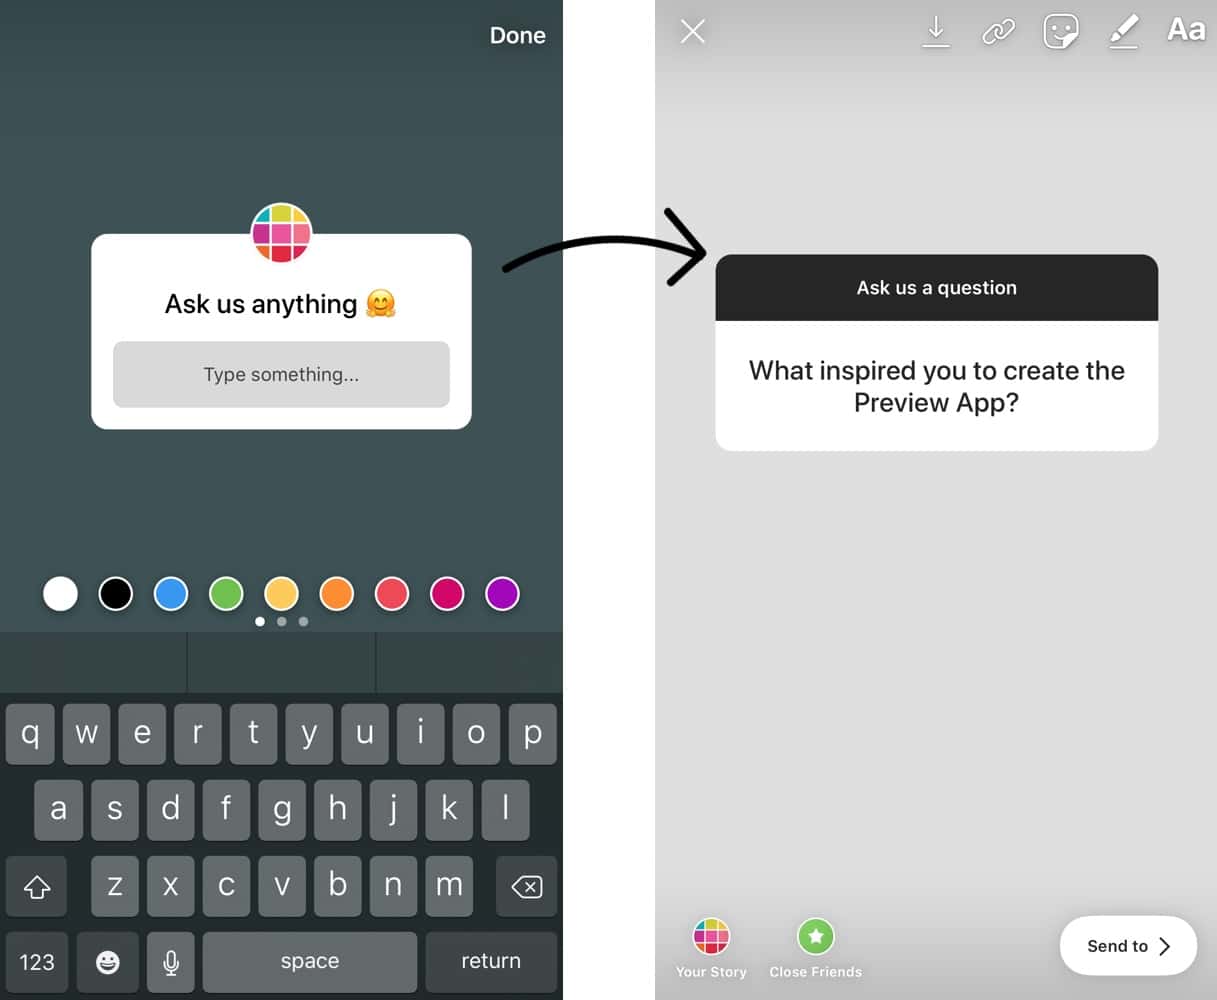 How To Use The Question Feature In Insta Story Tutorial Tricks Ideas Preview App